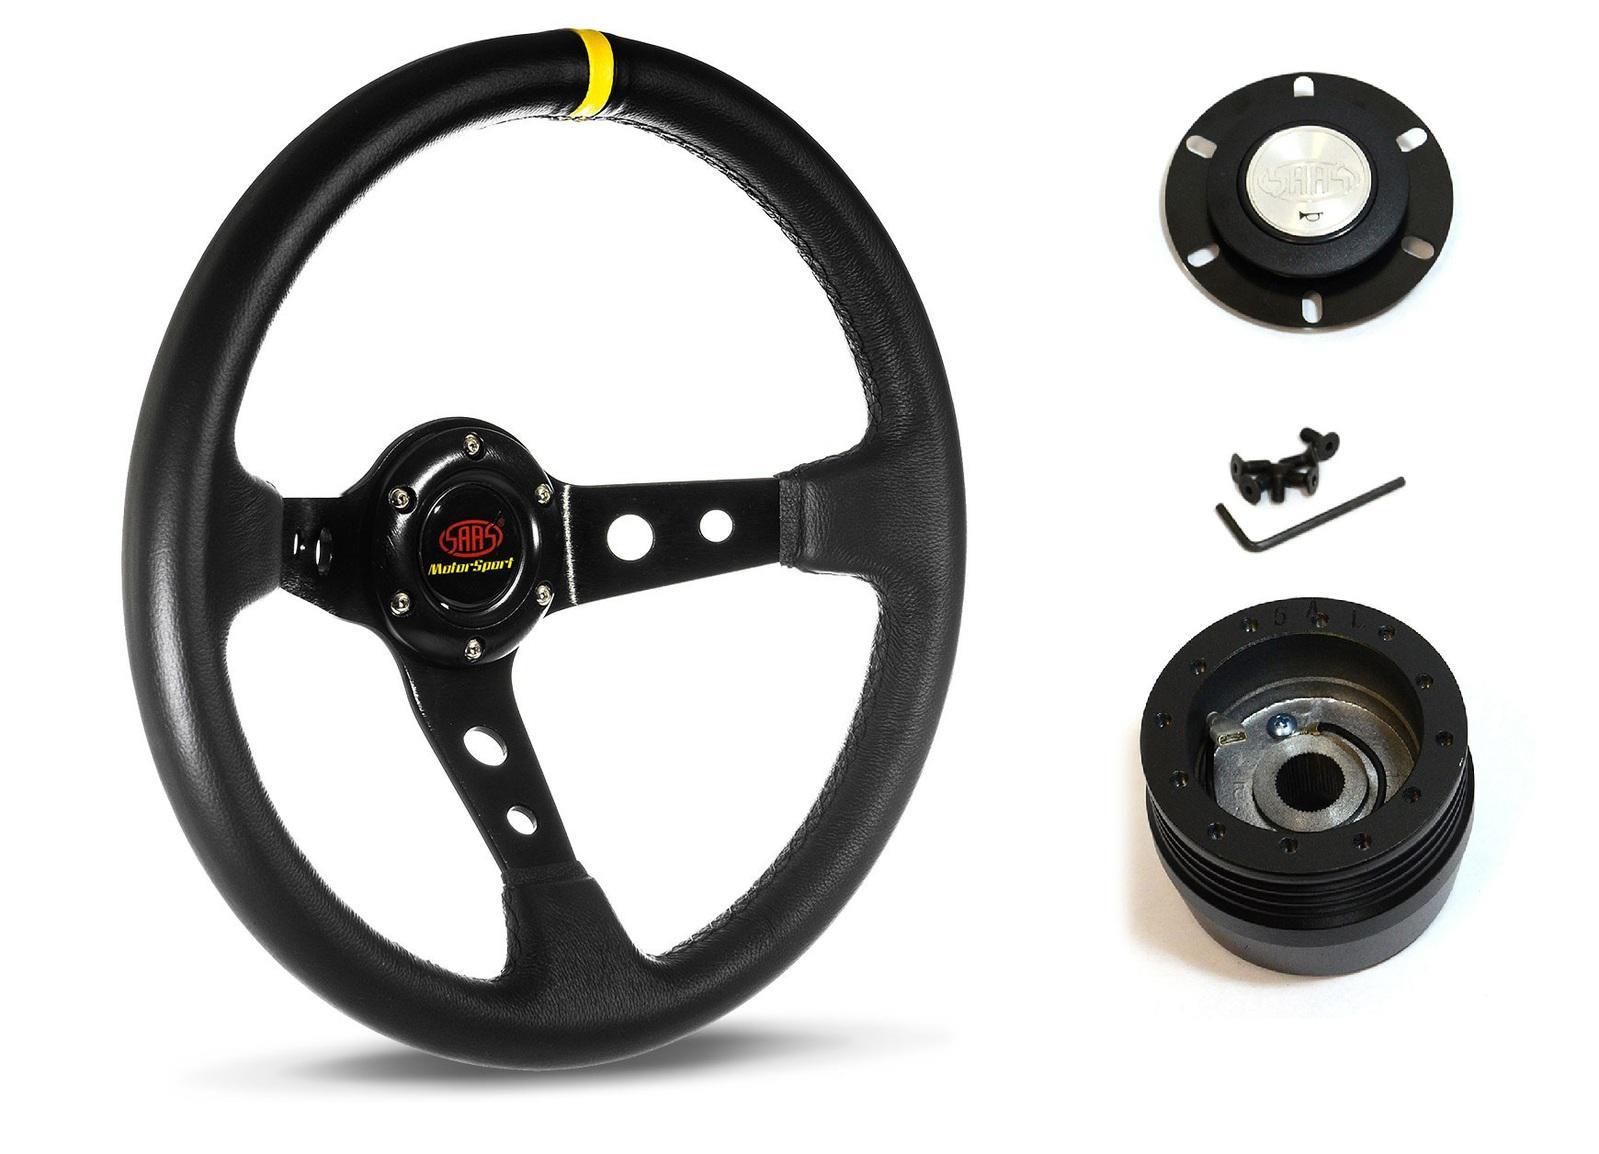 SAAS Steering Wheel Leather 14" ADR GT Deep Dish Black With Holes + Indicat SWGT2 and SAAS boss kit for Leyland Marina 1500 1750 1972-1974